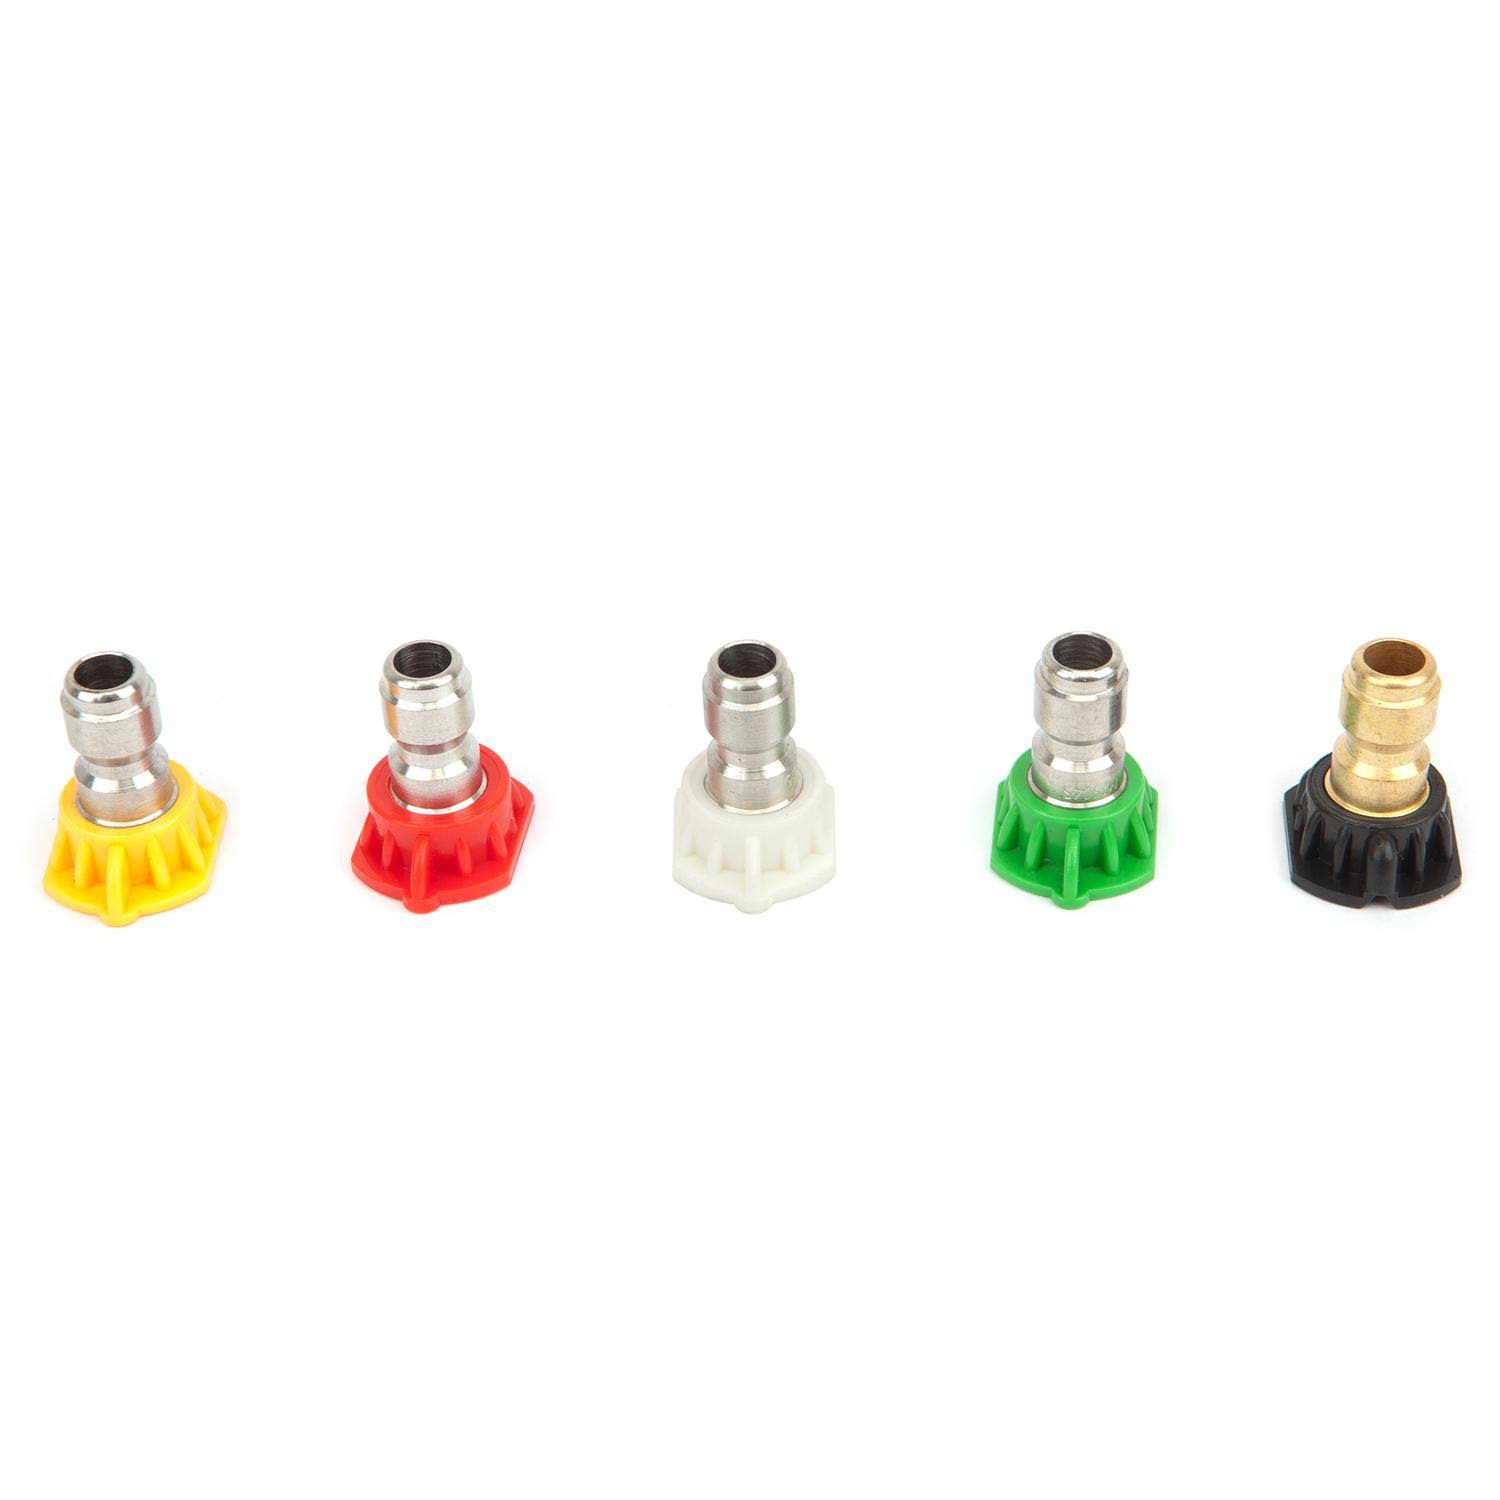 Forney 75148 Pressure Washer Spray Nozzle - Assortment, 4mm, 5pcs